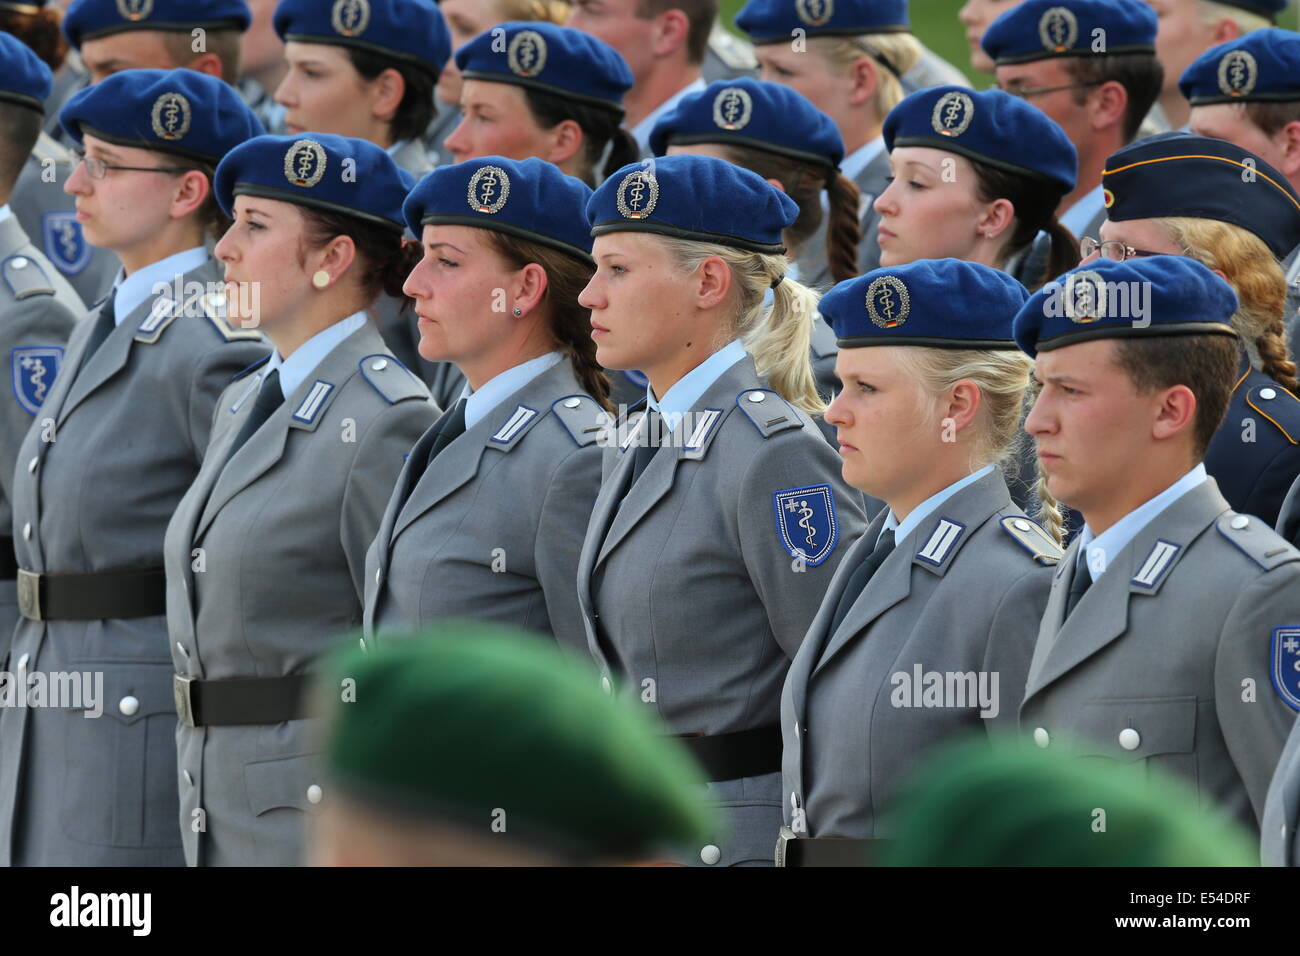 Berlin, Germany. 20th July, 2014. Bundeswehr soldiers stand in line to ...